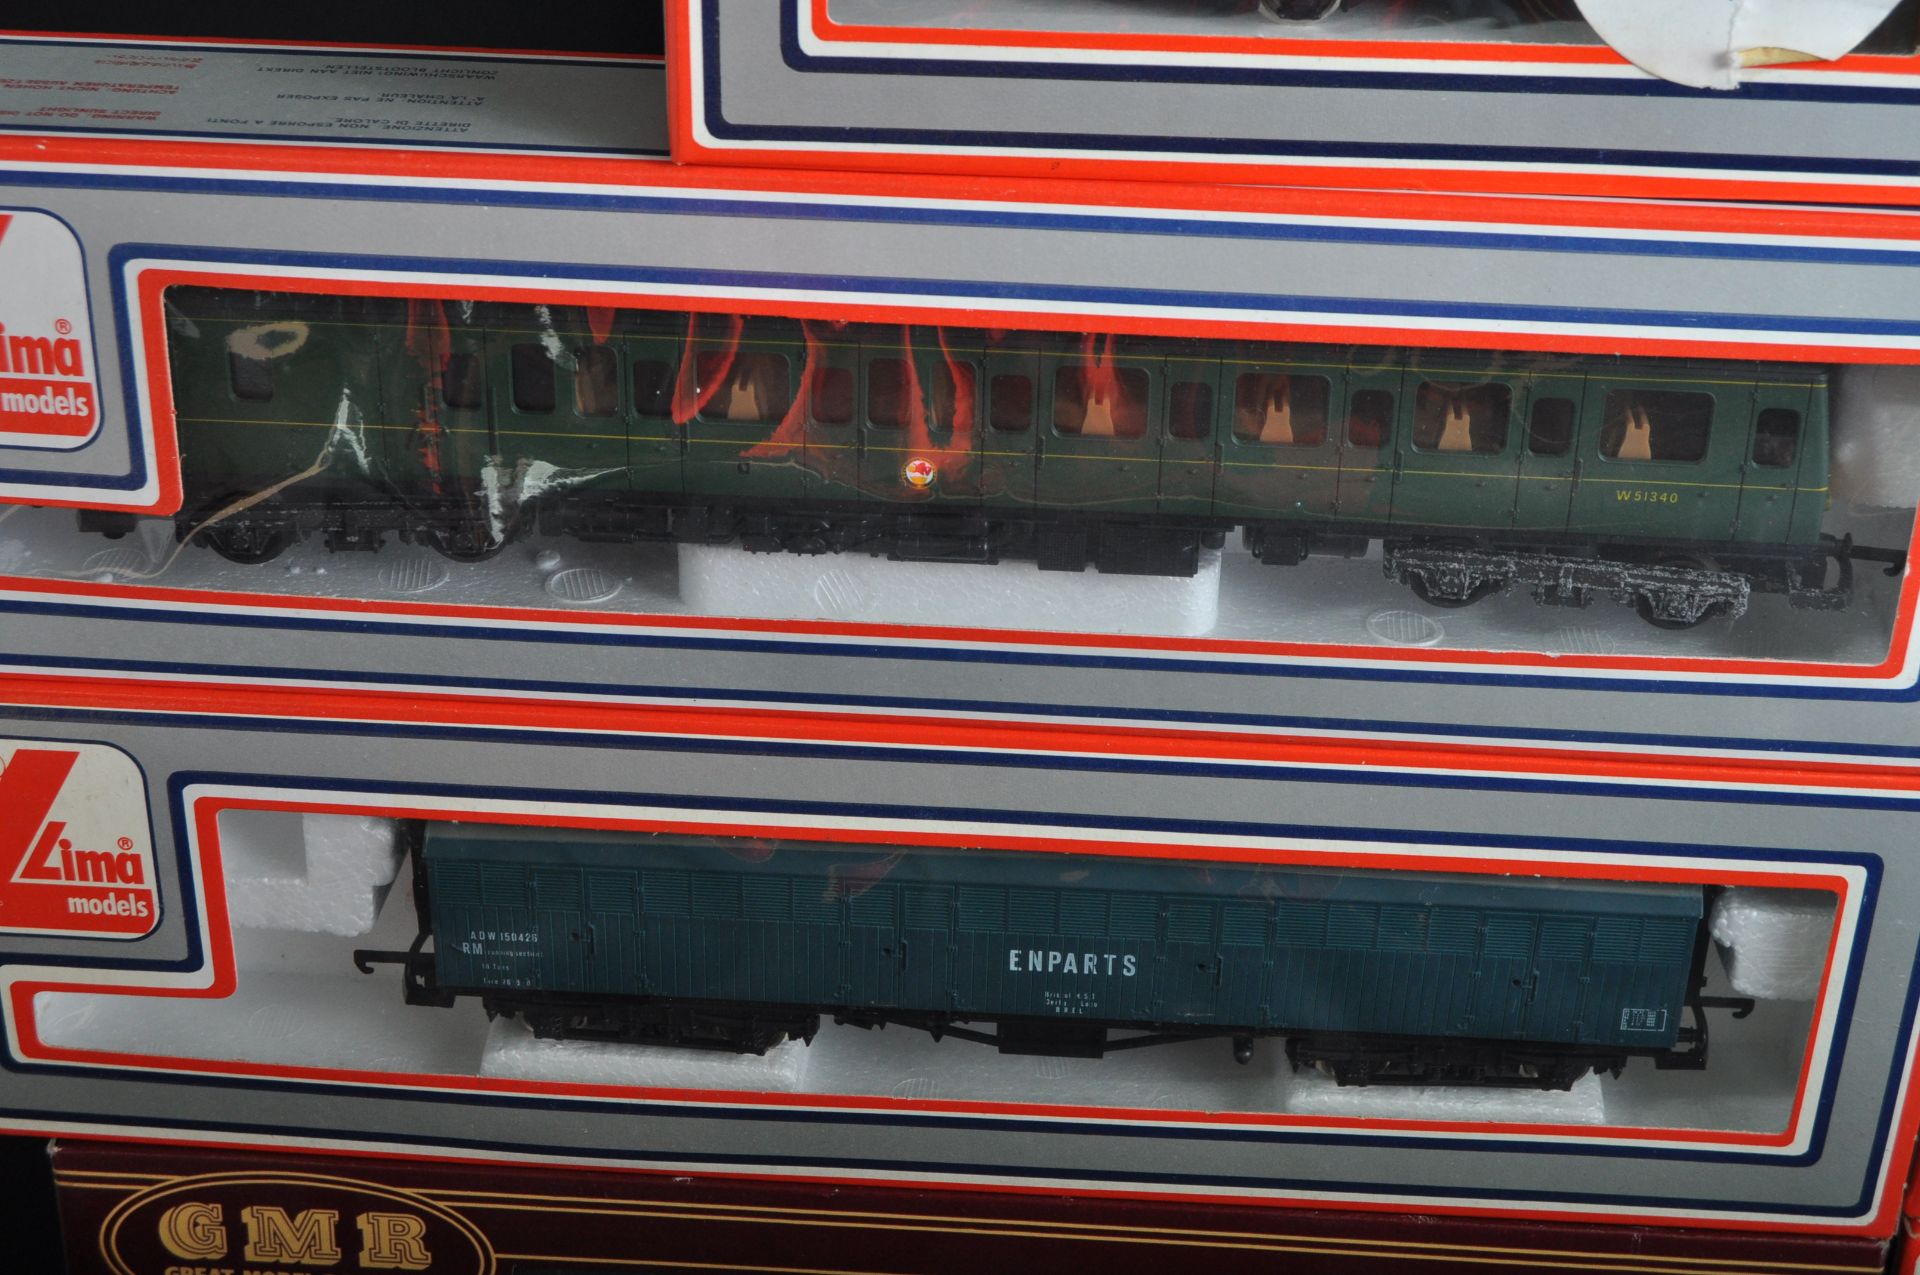 COLLECTION OF LIMA & AIRFIX 00 GAUGE MODEL RAILWAY CARRIAGES - Image 7 of 8